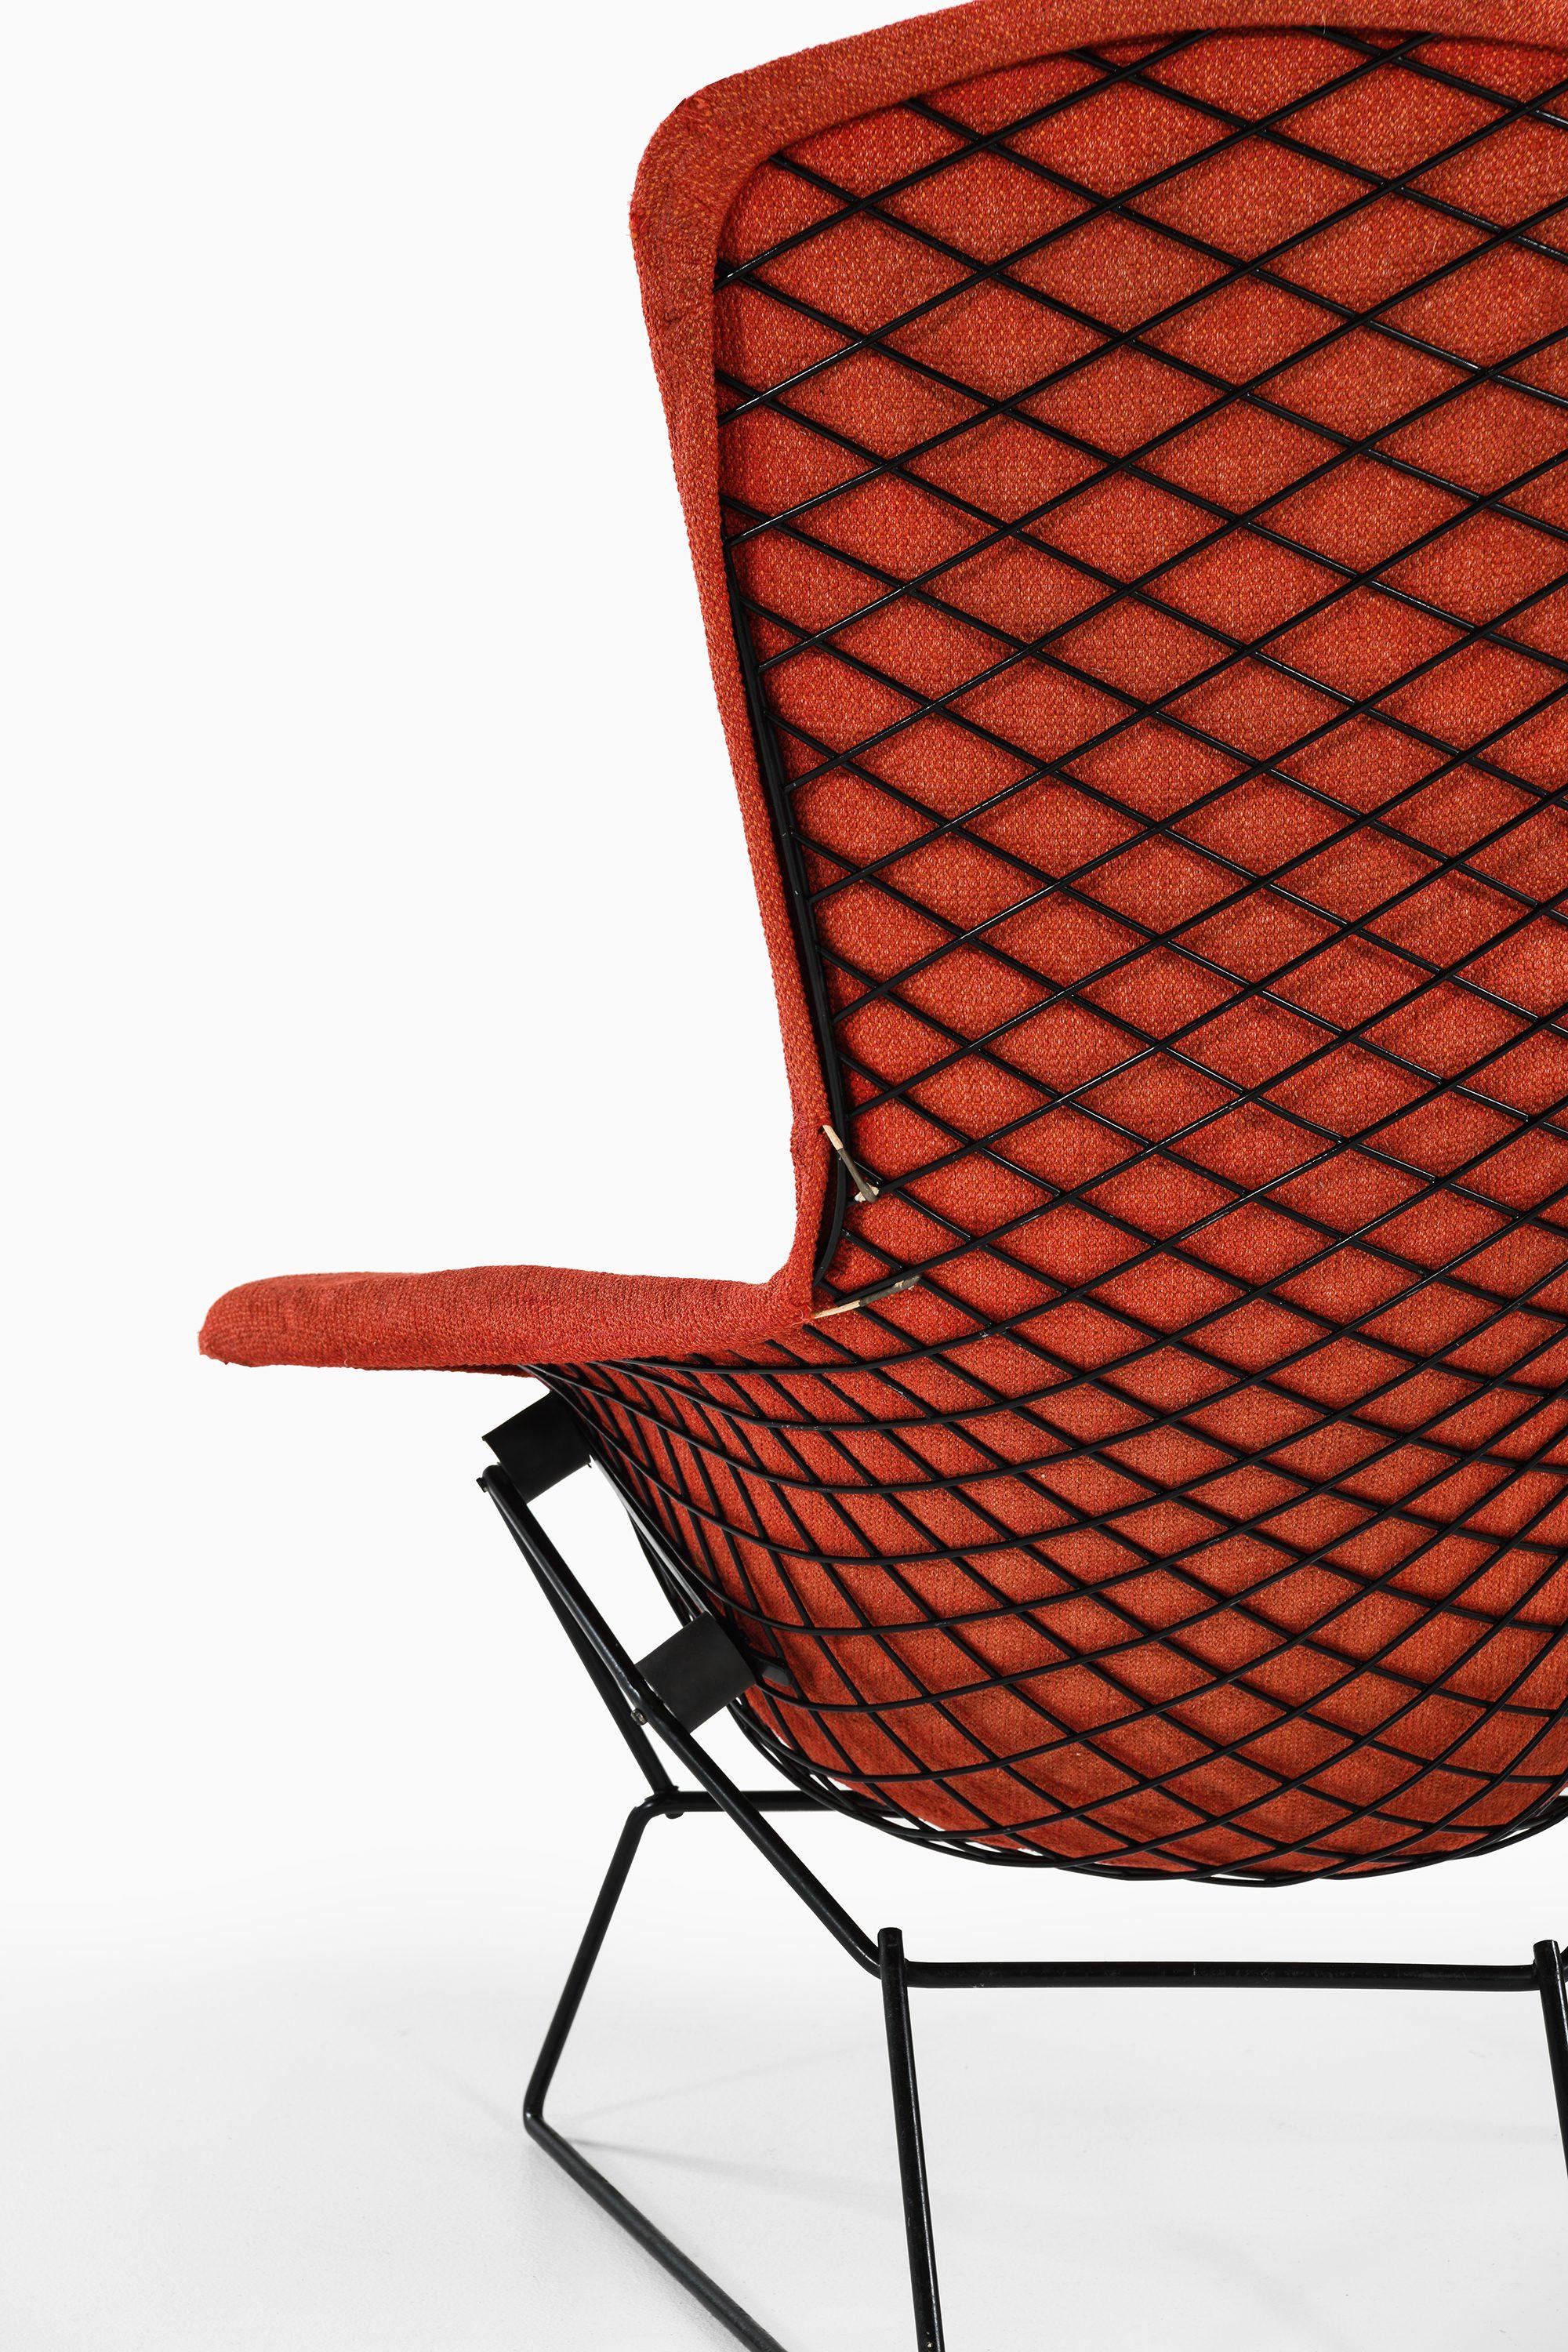 Easy Bird Chair in Black Lacquered Metal and Red Fabric by Harry Bertoia, 1950s For Sale 2